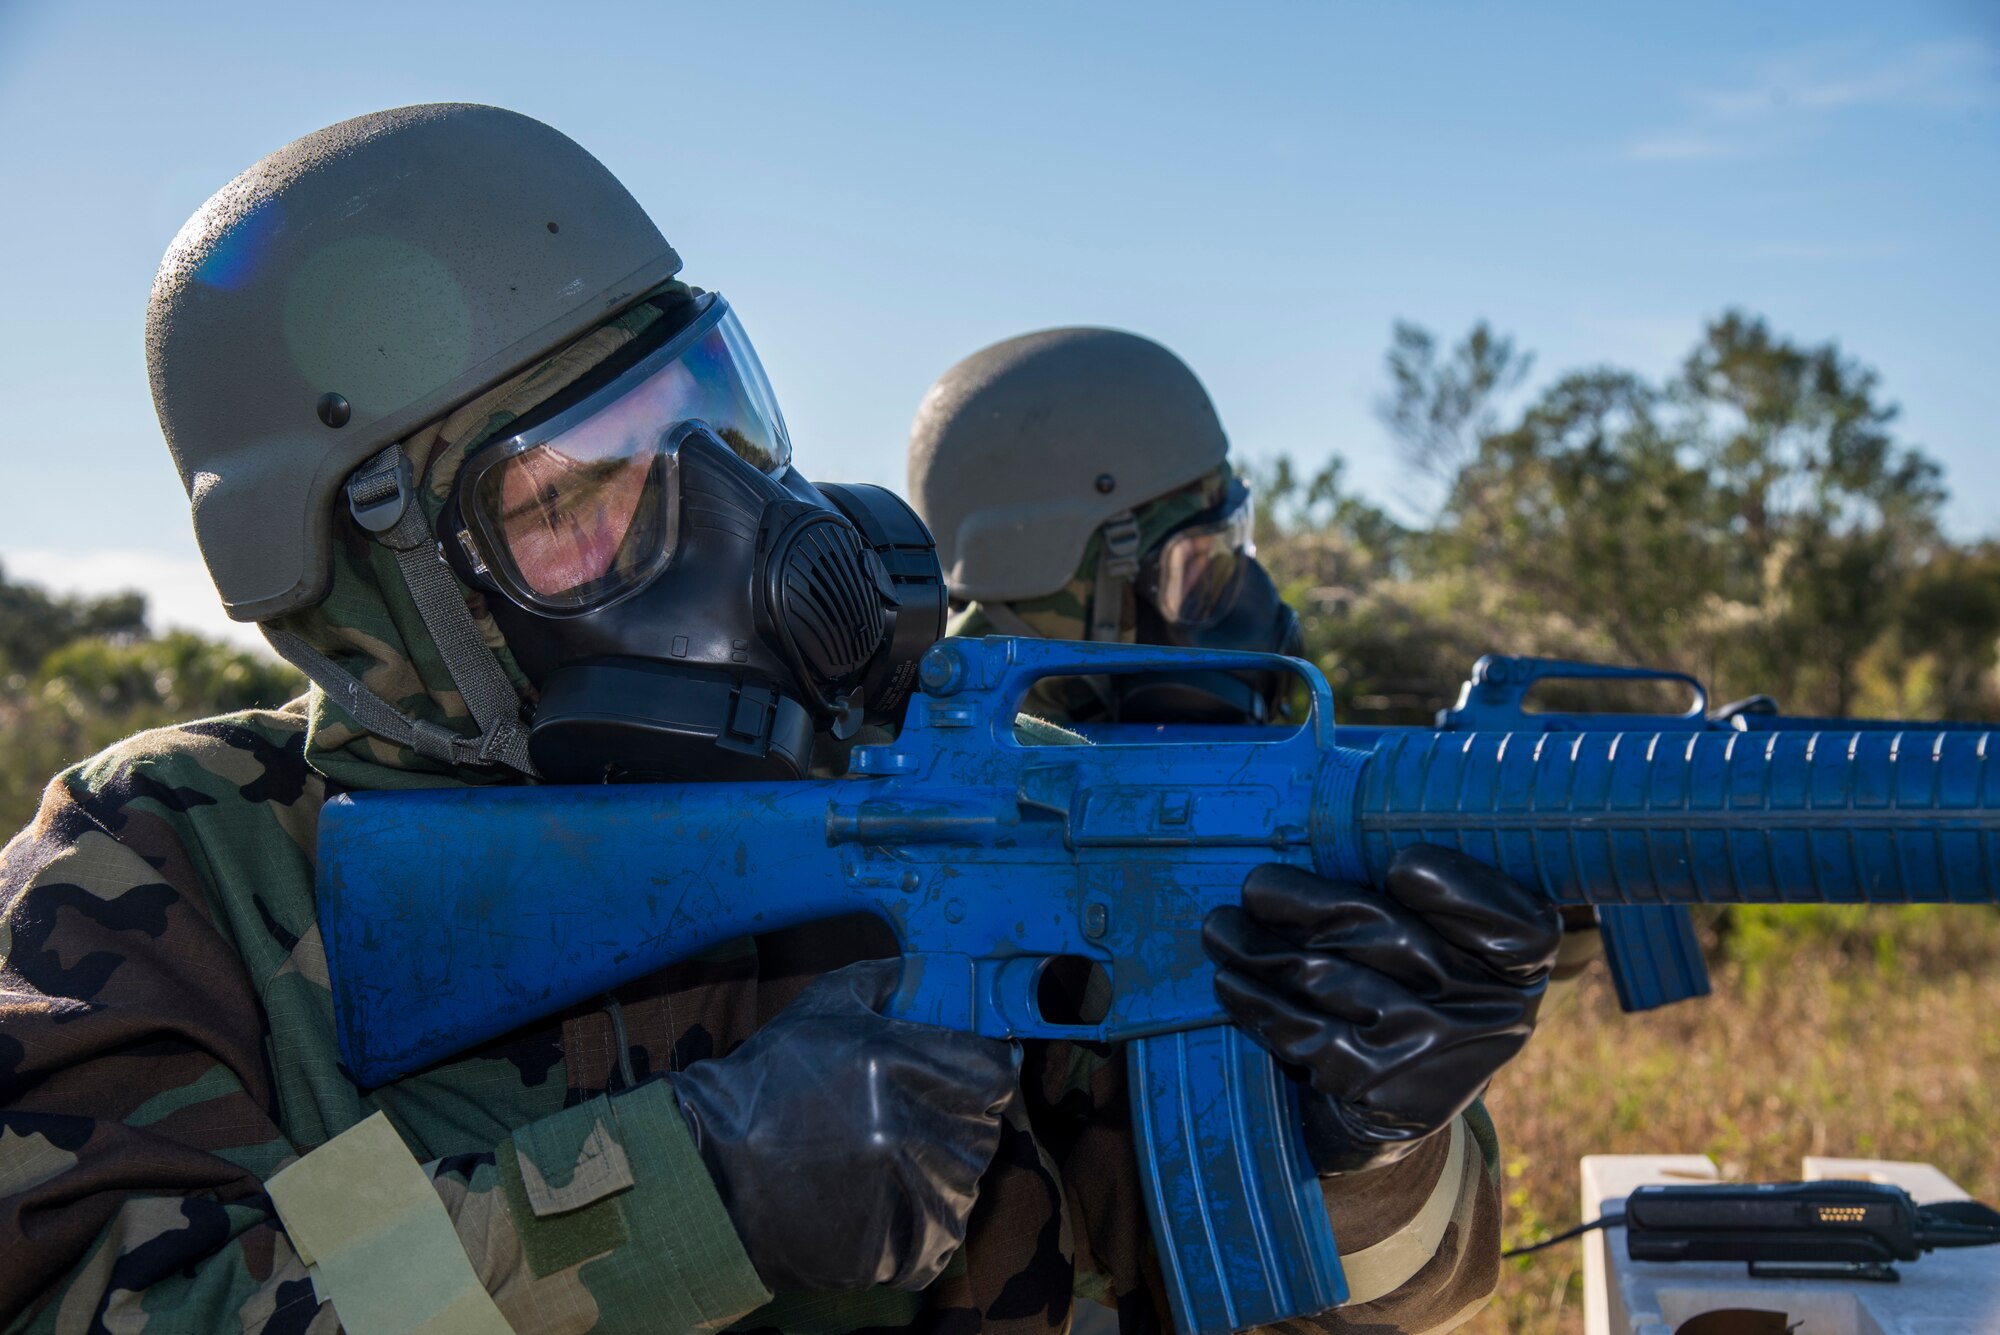 U.S. Air Force Airman Zackary Gustafson, 6th Logistics Readiness Squadron fuels distribution apprentice
and Senior Airman Andrew Cary, a contracting specialist assigned to the 6th Contracting Squadron, scan
their area of responsibility for threats during an Ability to Survive and Operate training exercise at
MacDill, Air Force Base, Fla., Dec. 6, 2018. The Airmen are occupying a defensive position to protect
simulated vital assets from enemy attack.